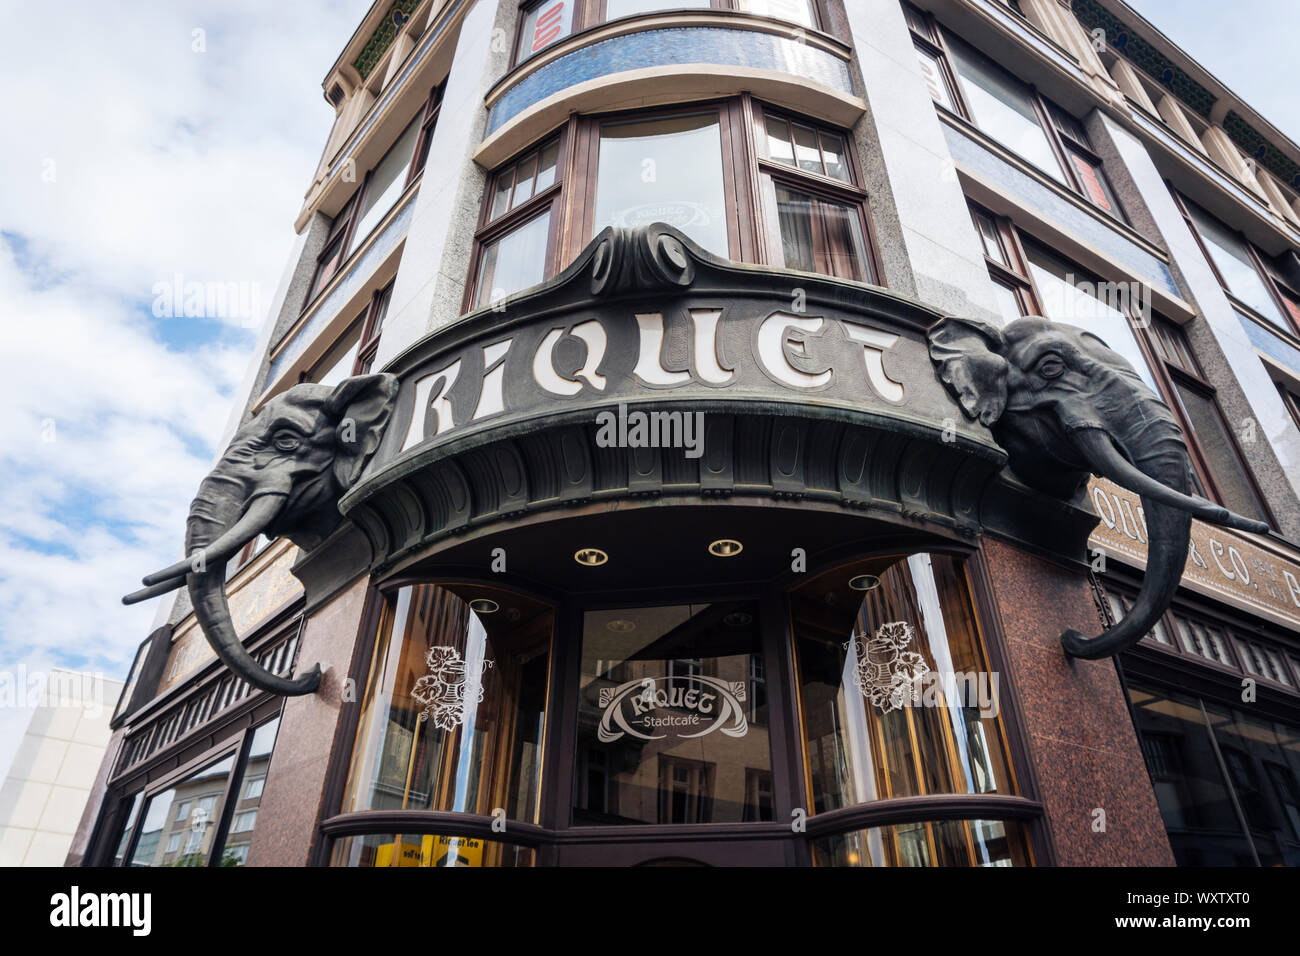 Leipzig Germany - July 11, 2018: Cafe Riquet in Leipzig, Germany. Cafe facade in colonial style with elephant heads where the font is embedded in elep Stock Photo